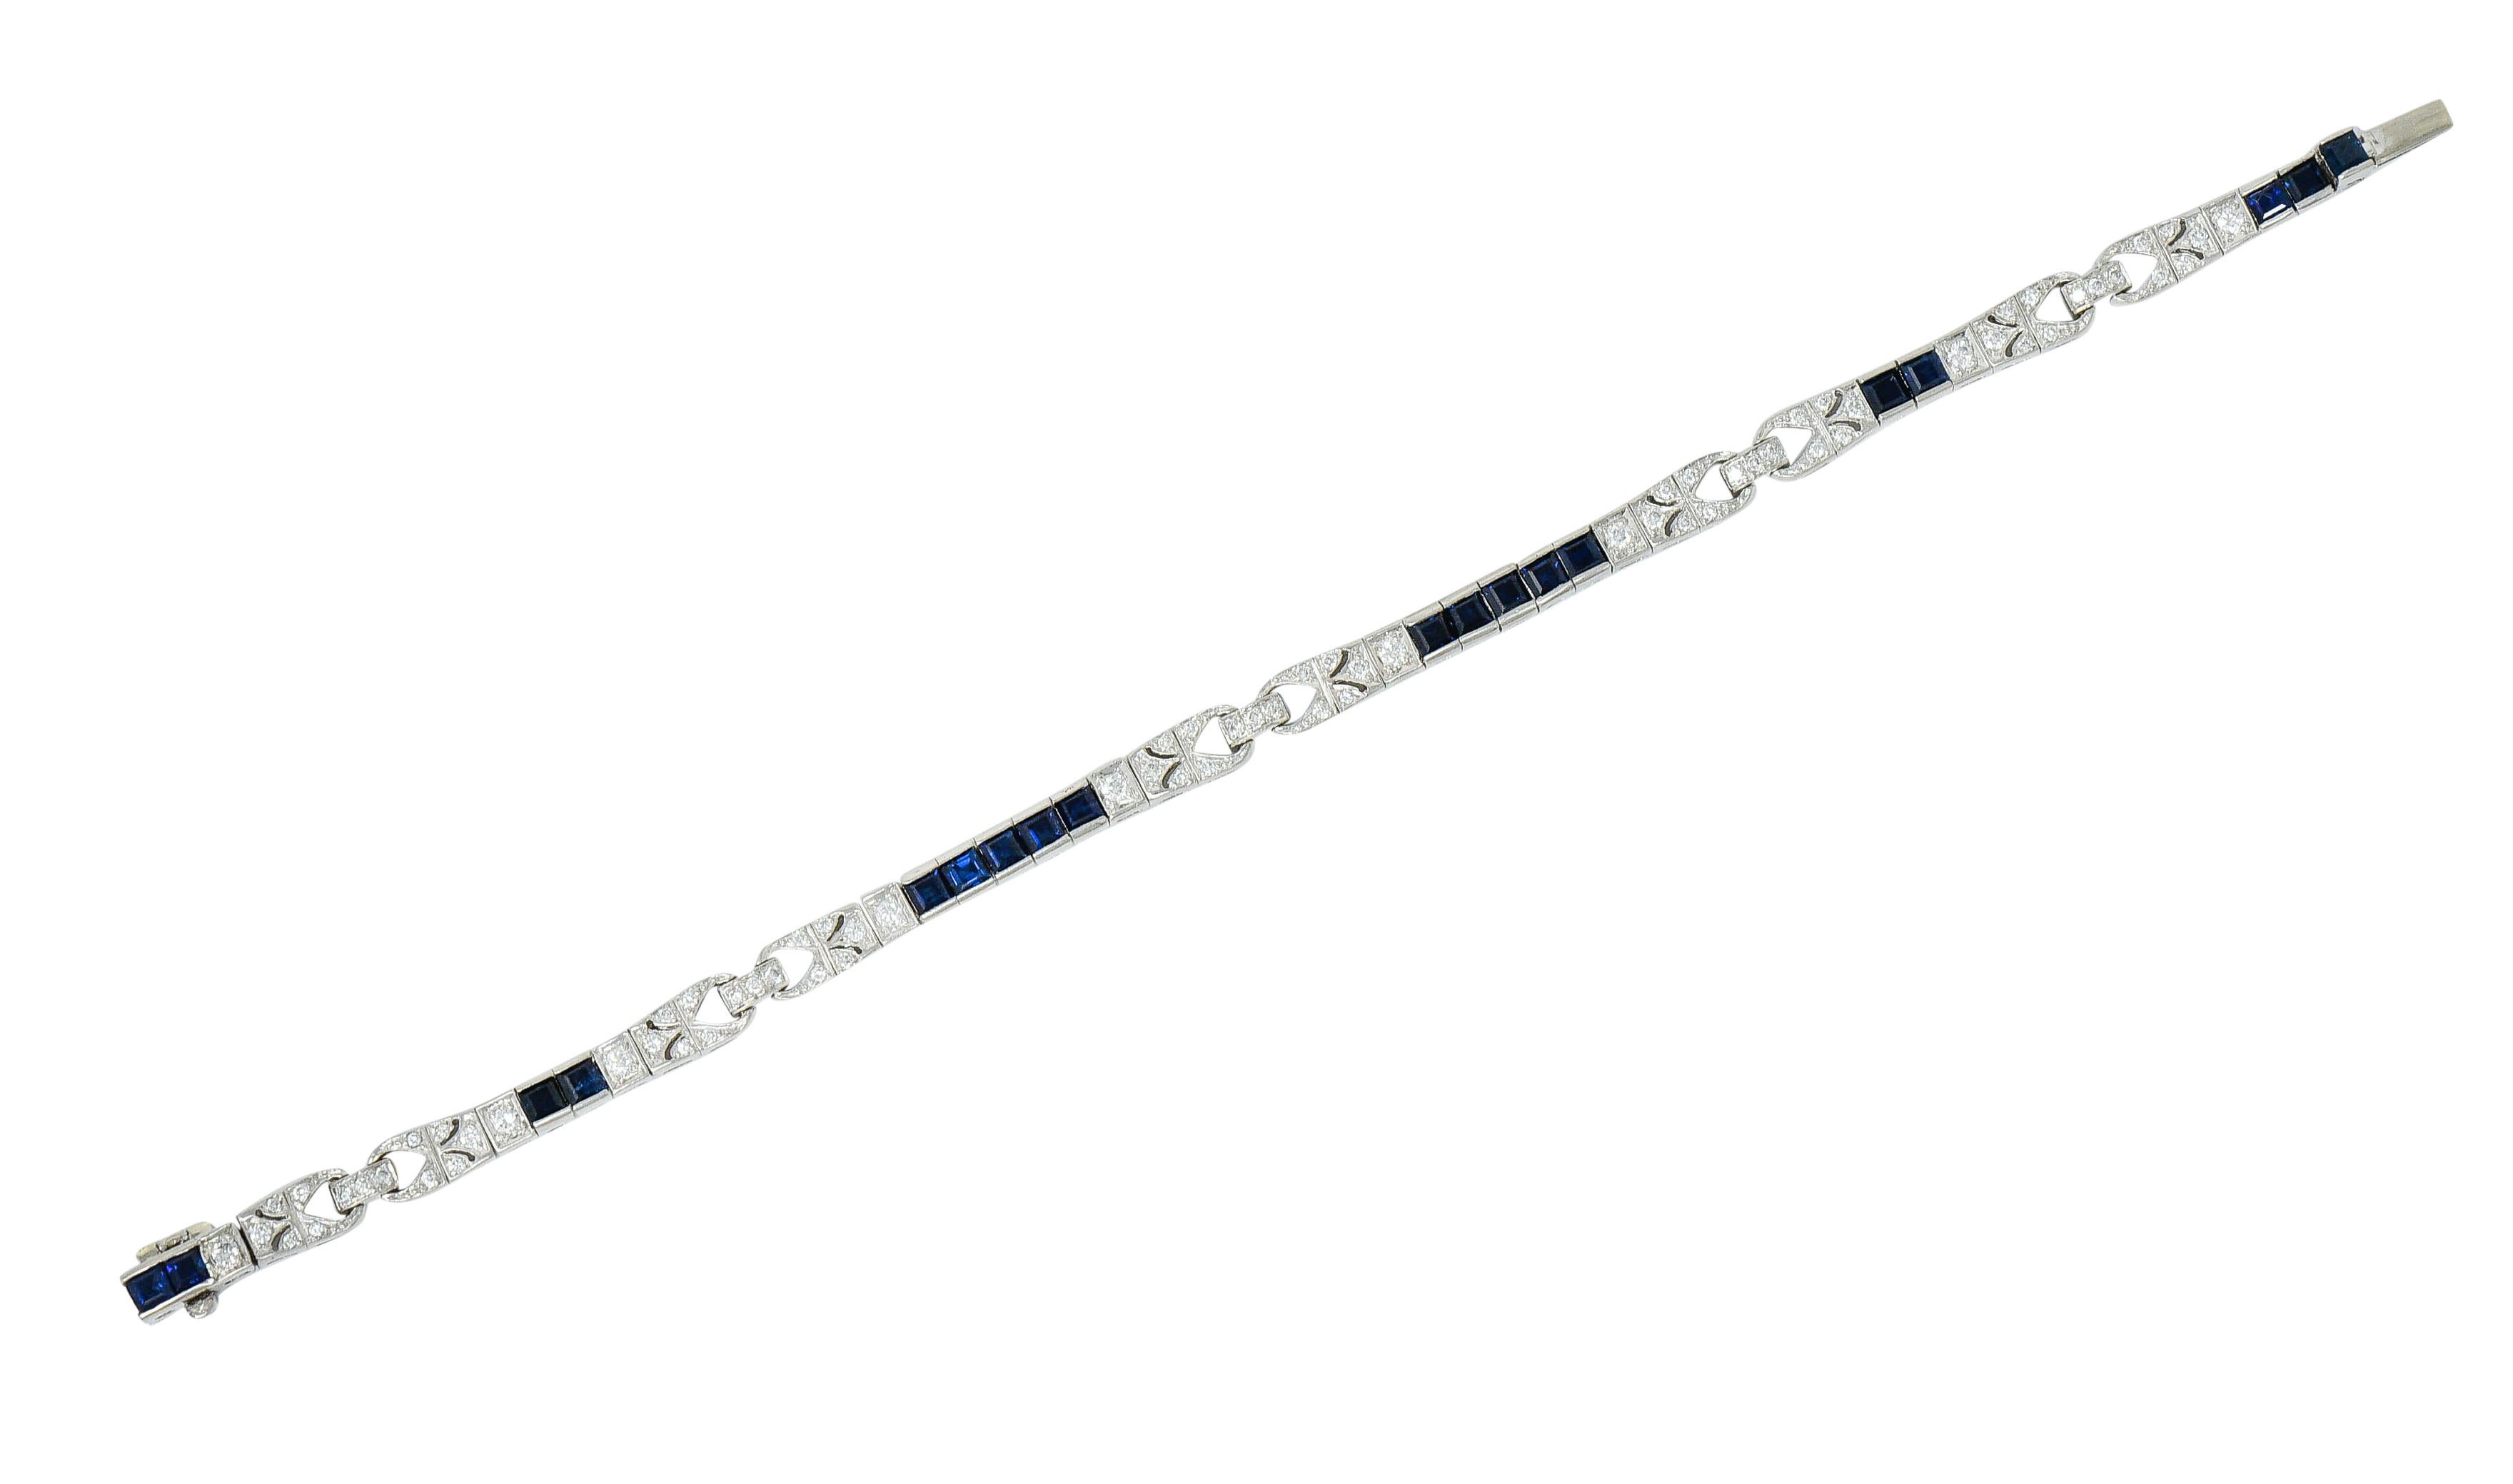 Line style bracelet is designed with a subtle buckle motif alternating with channel set sapphires

Square cut sapphires are a well-matched dark blue and weigh in total approximately 3.65 carats

Accented by round brilliant cut diamonds weighing in